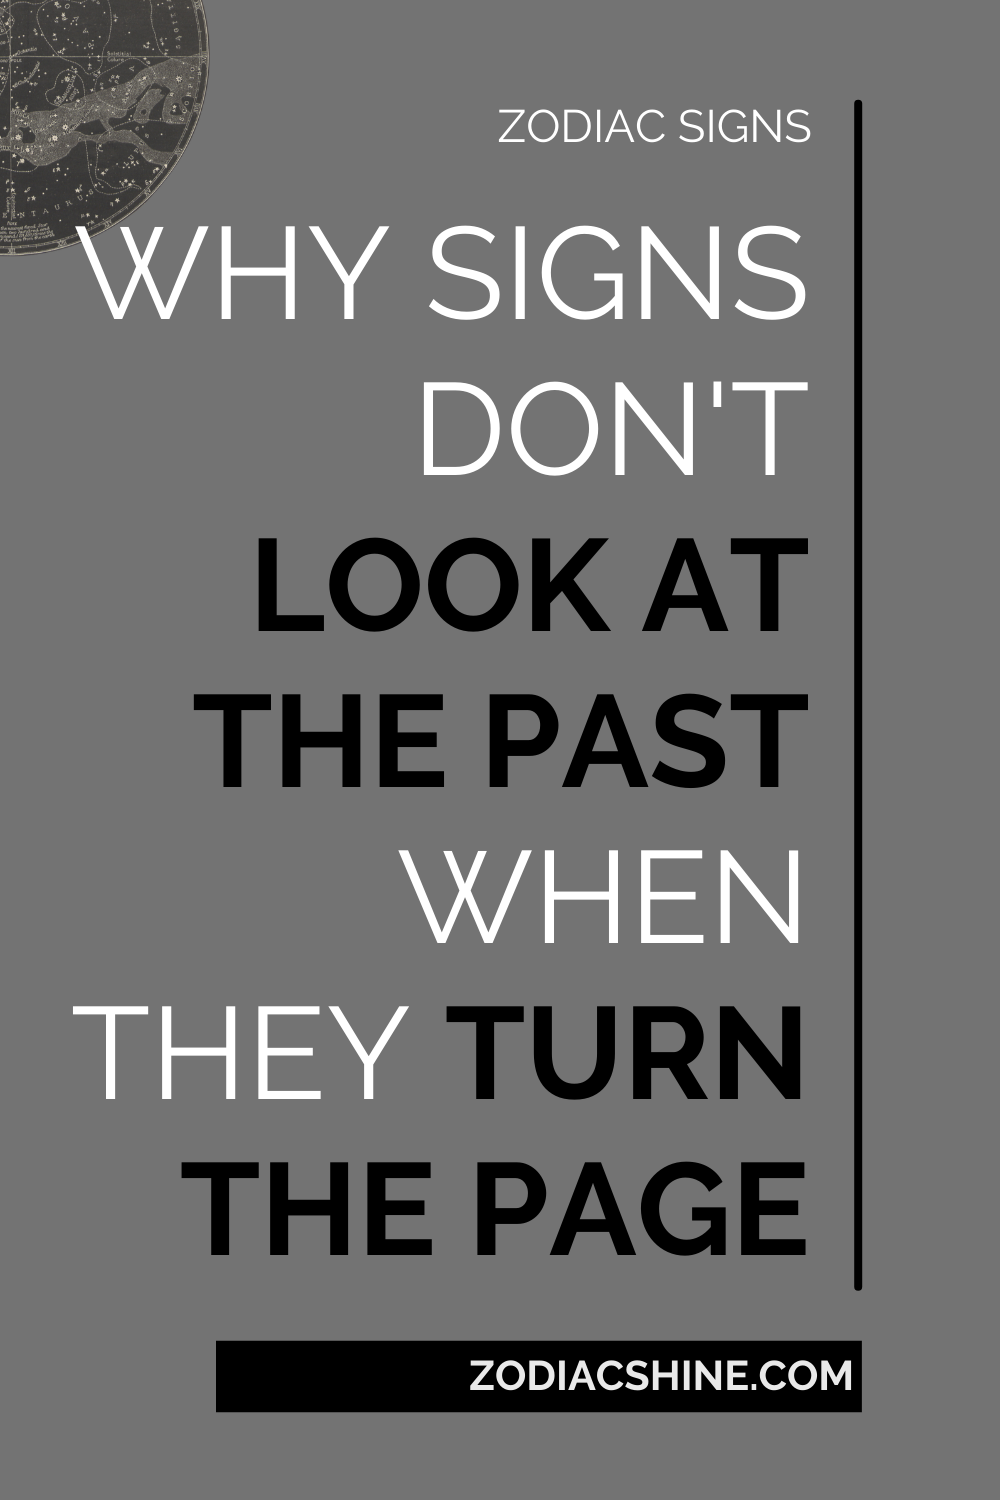 Why Signs Don't Look At The Past When They Turn The Page